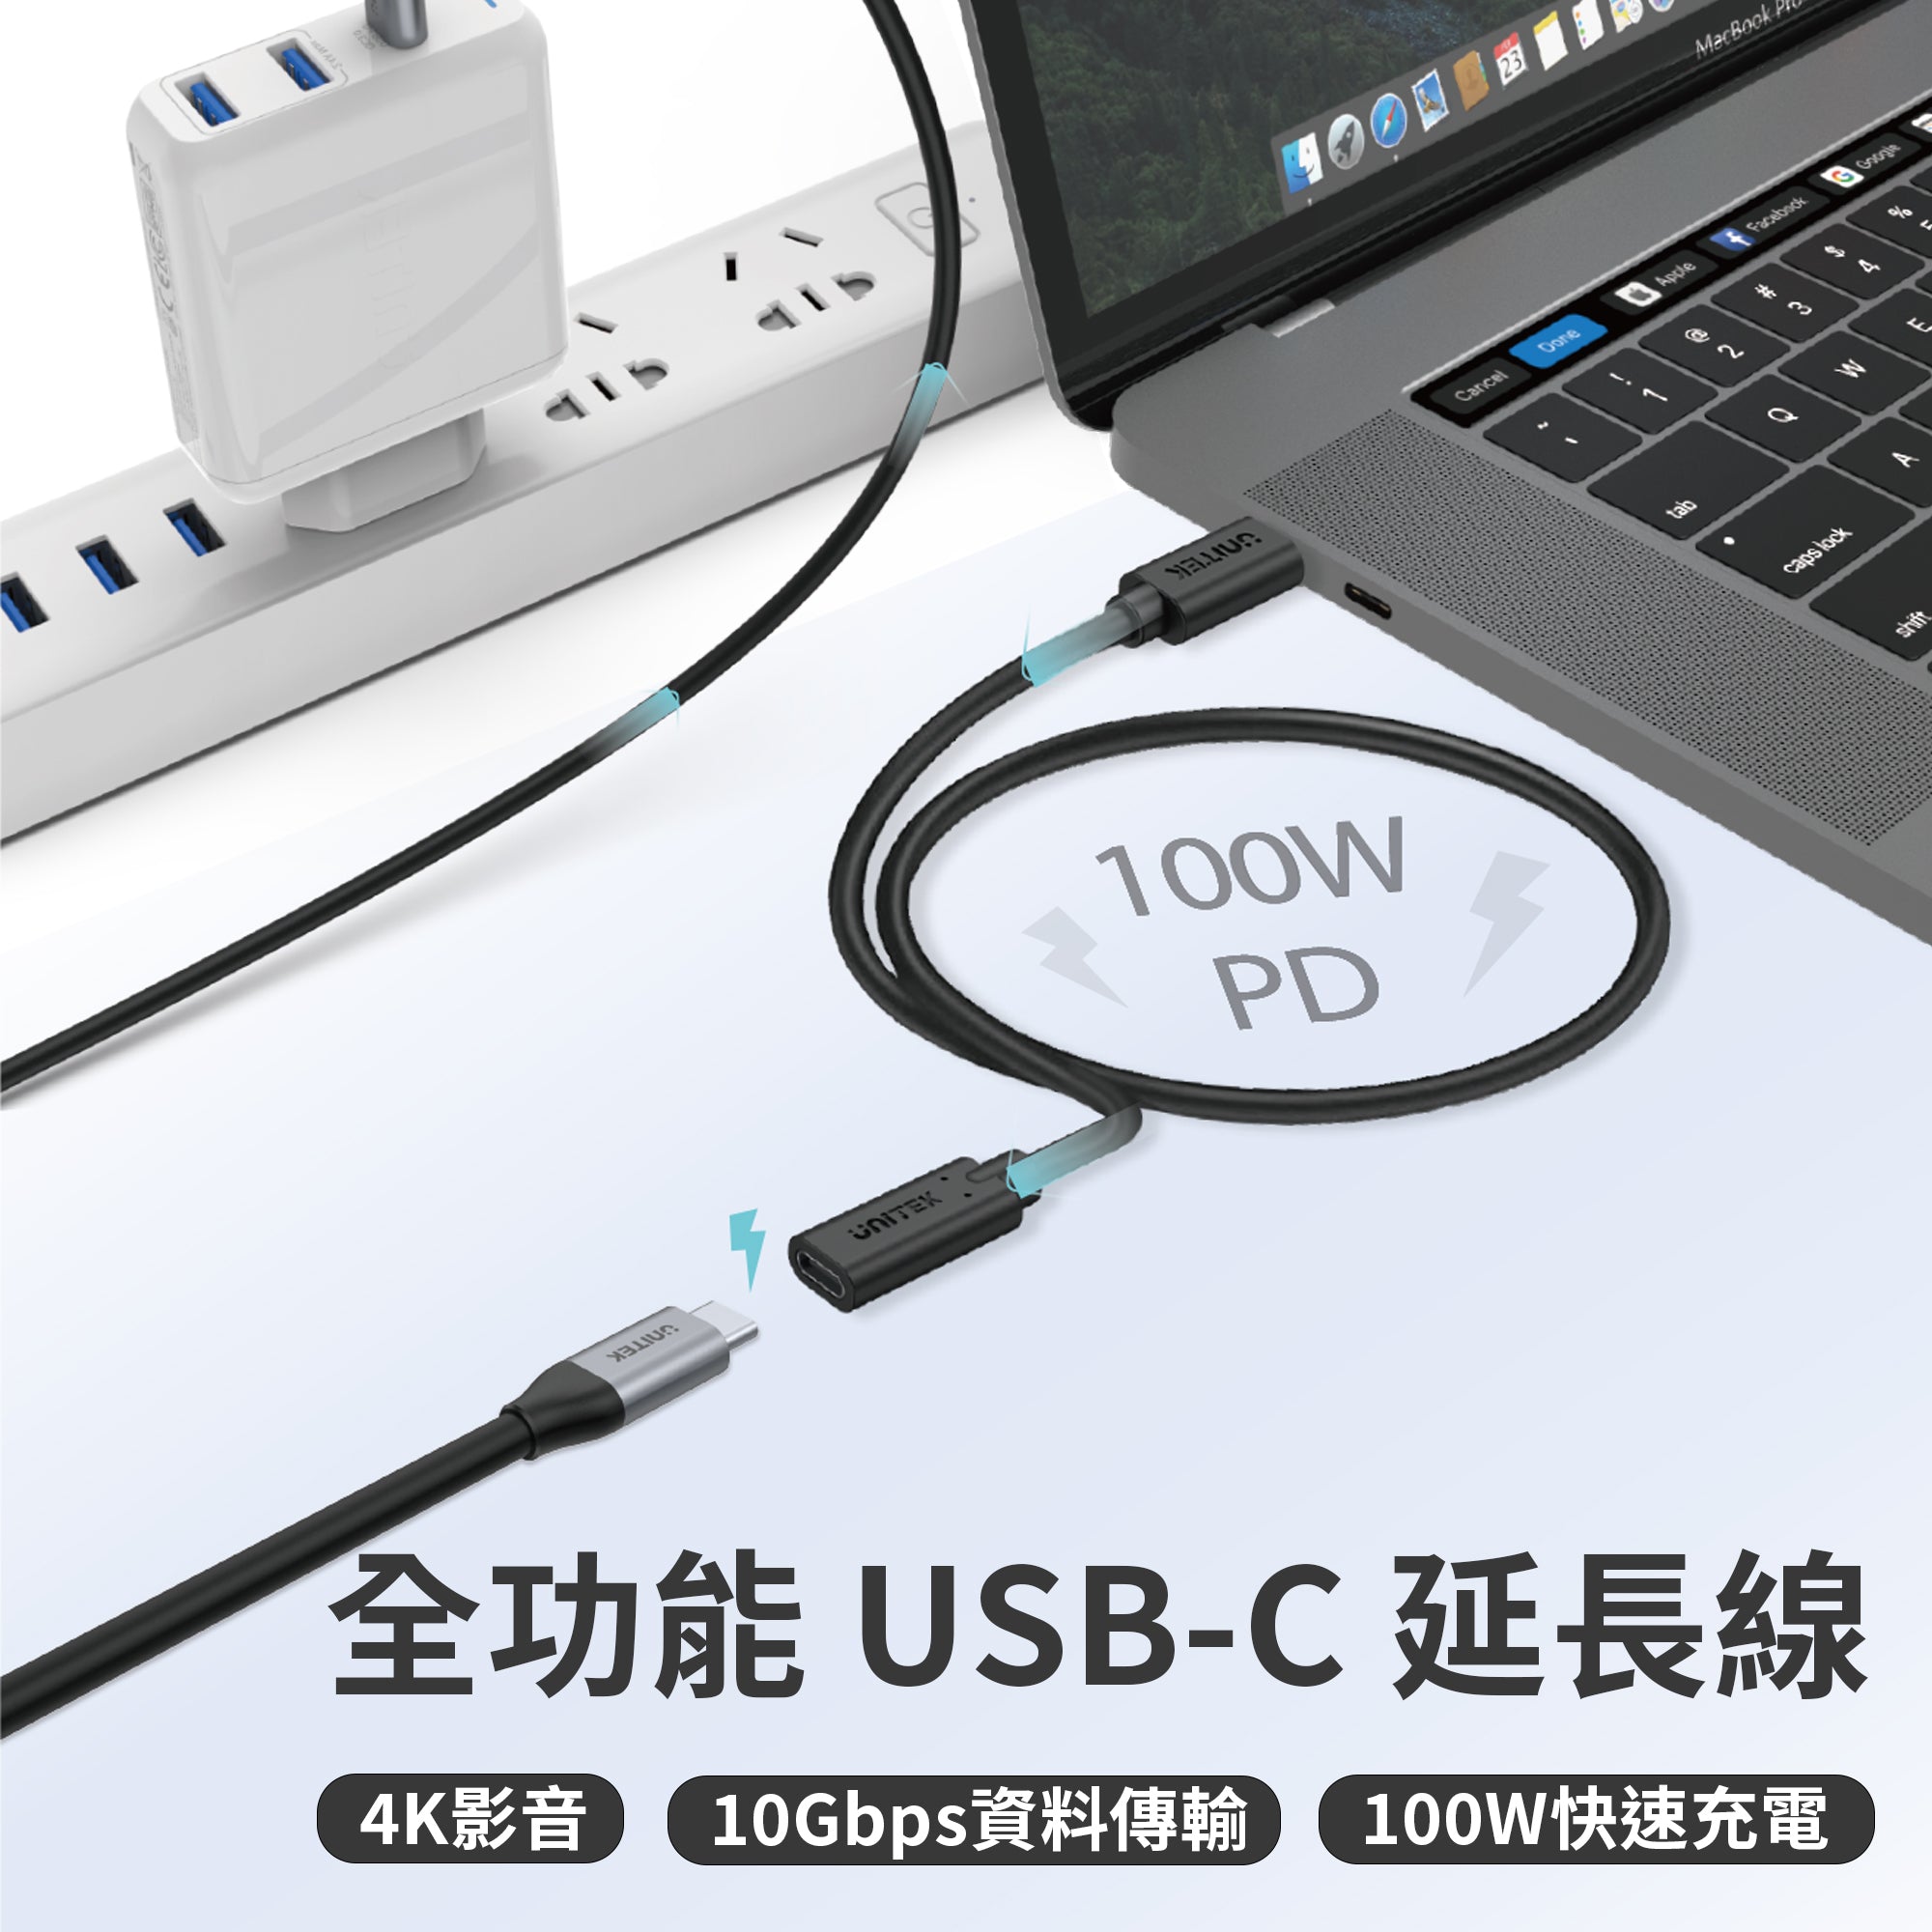 Touhou gevolgtrekking Luchtvaart Full-Featured USB-C Extension Cable with 4K@60Hz, 100W Power Delivery